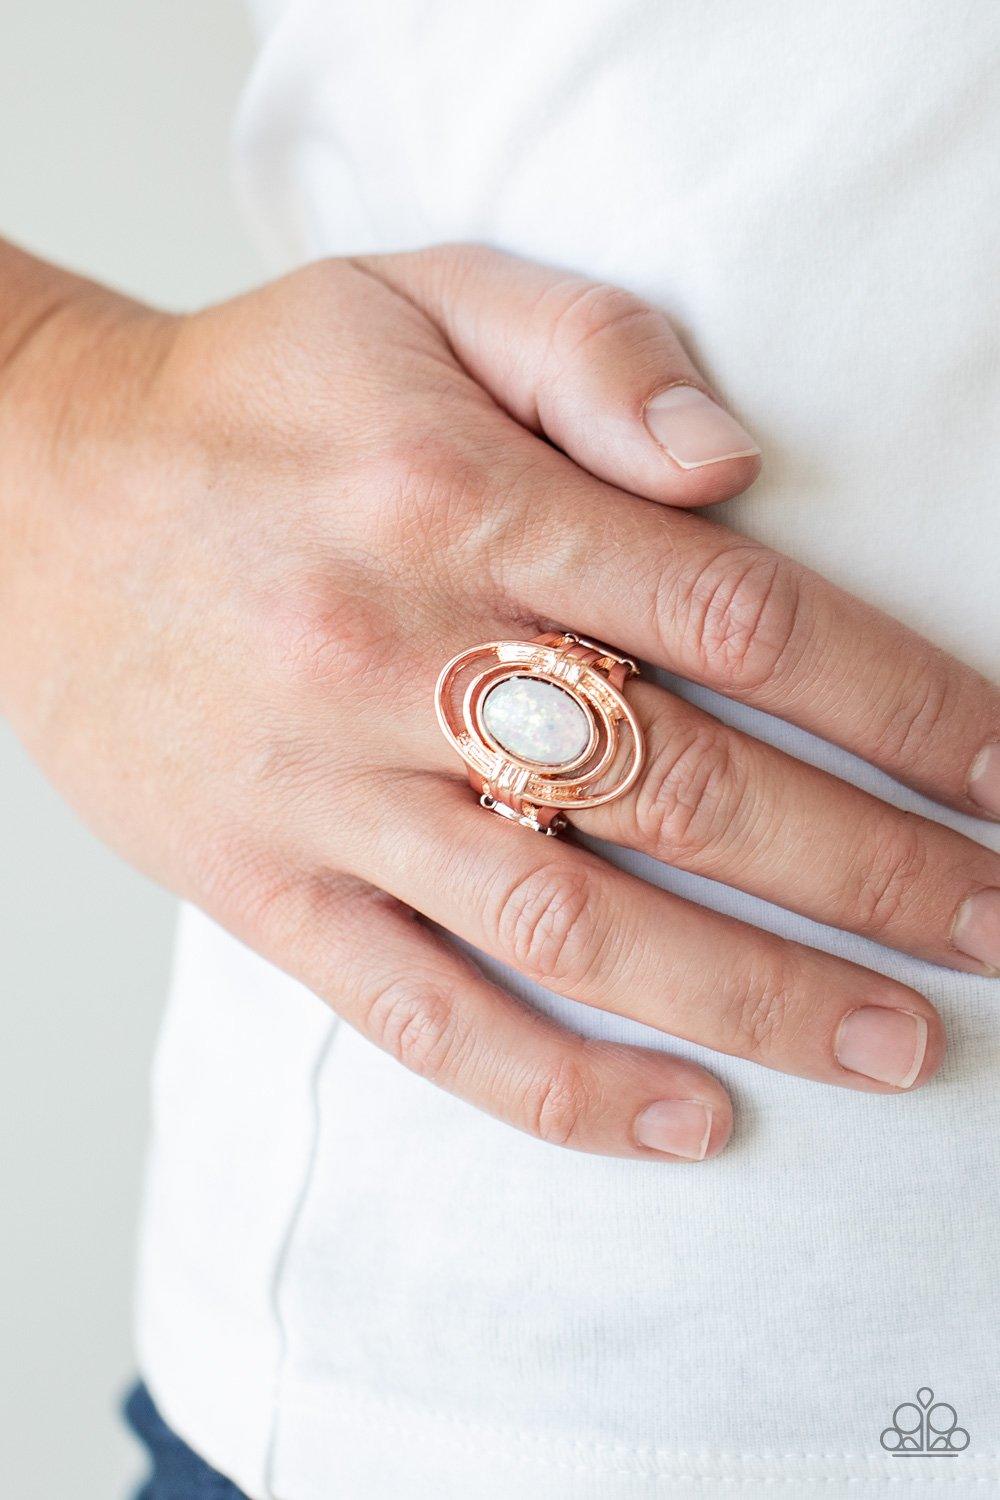  Paparazzi Accessories-Peacefully Pristine - Rose Gold Ring